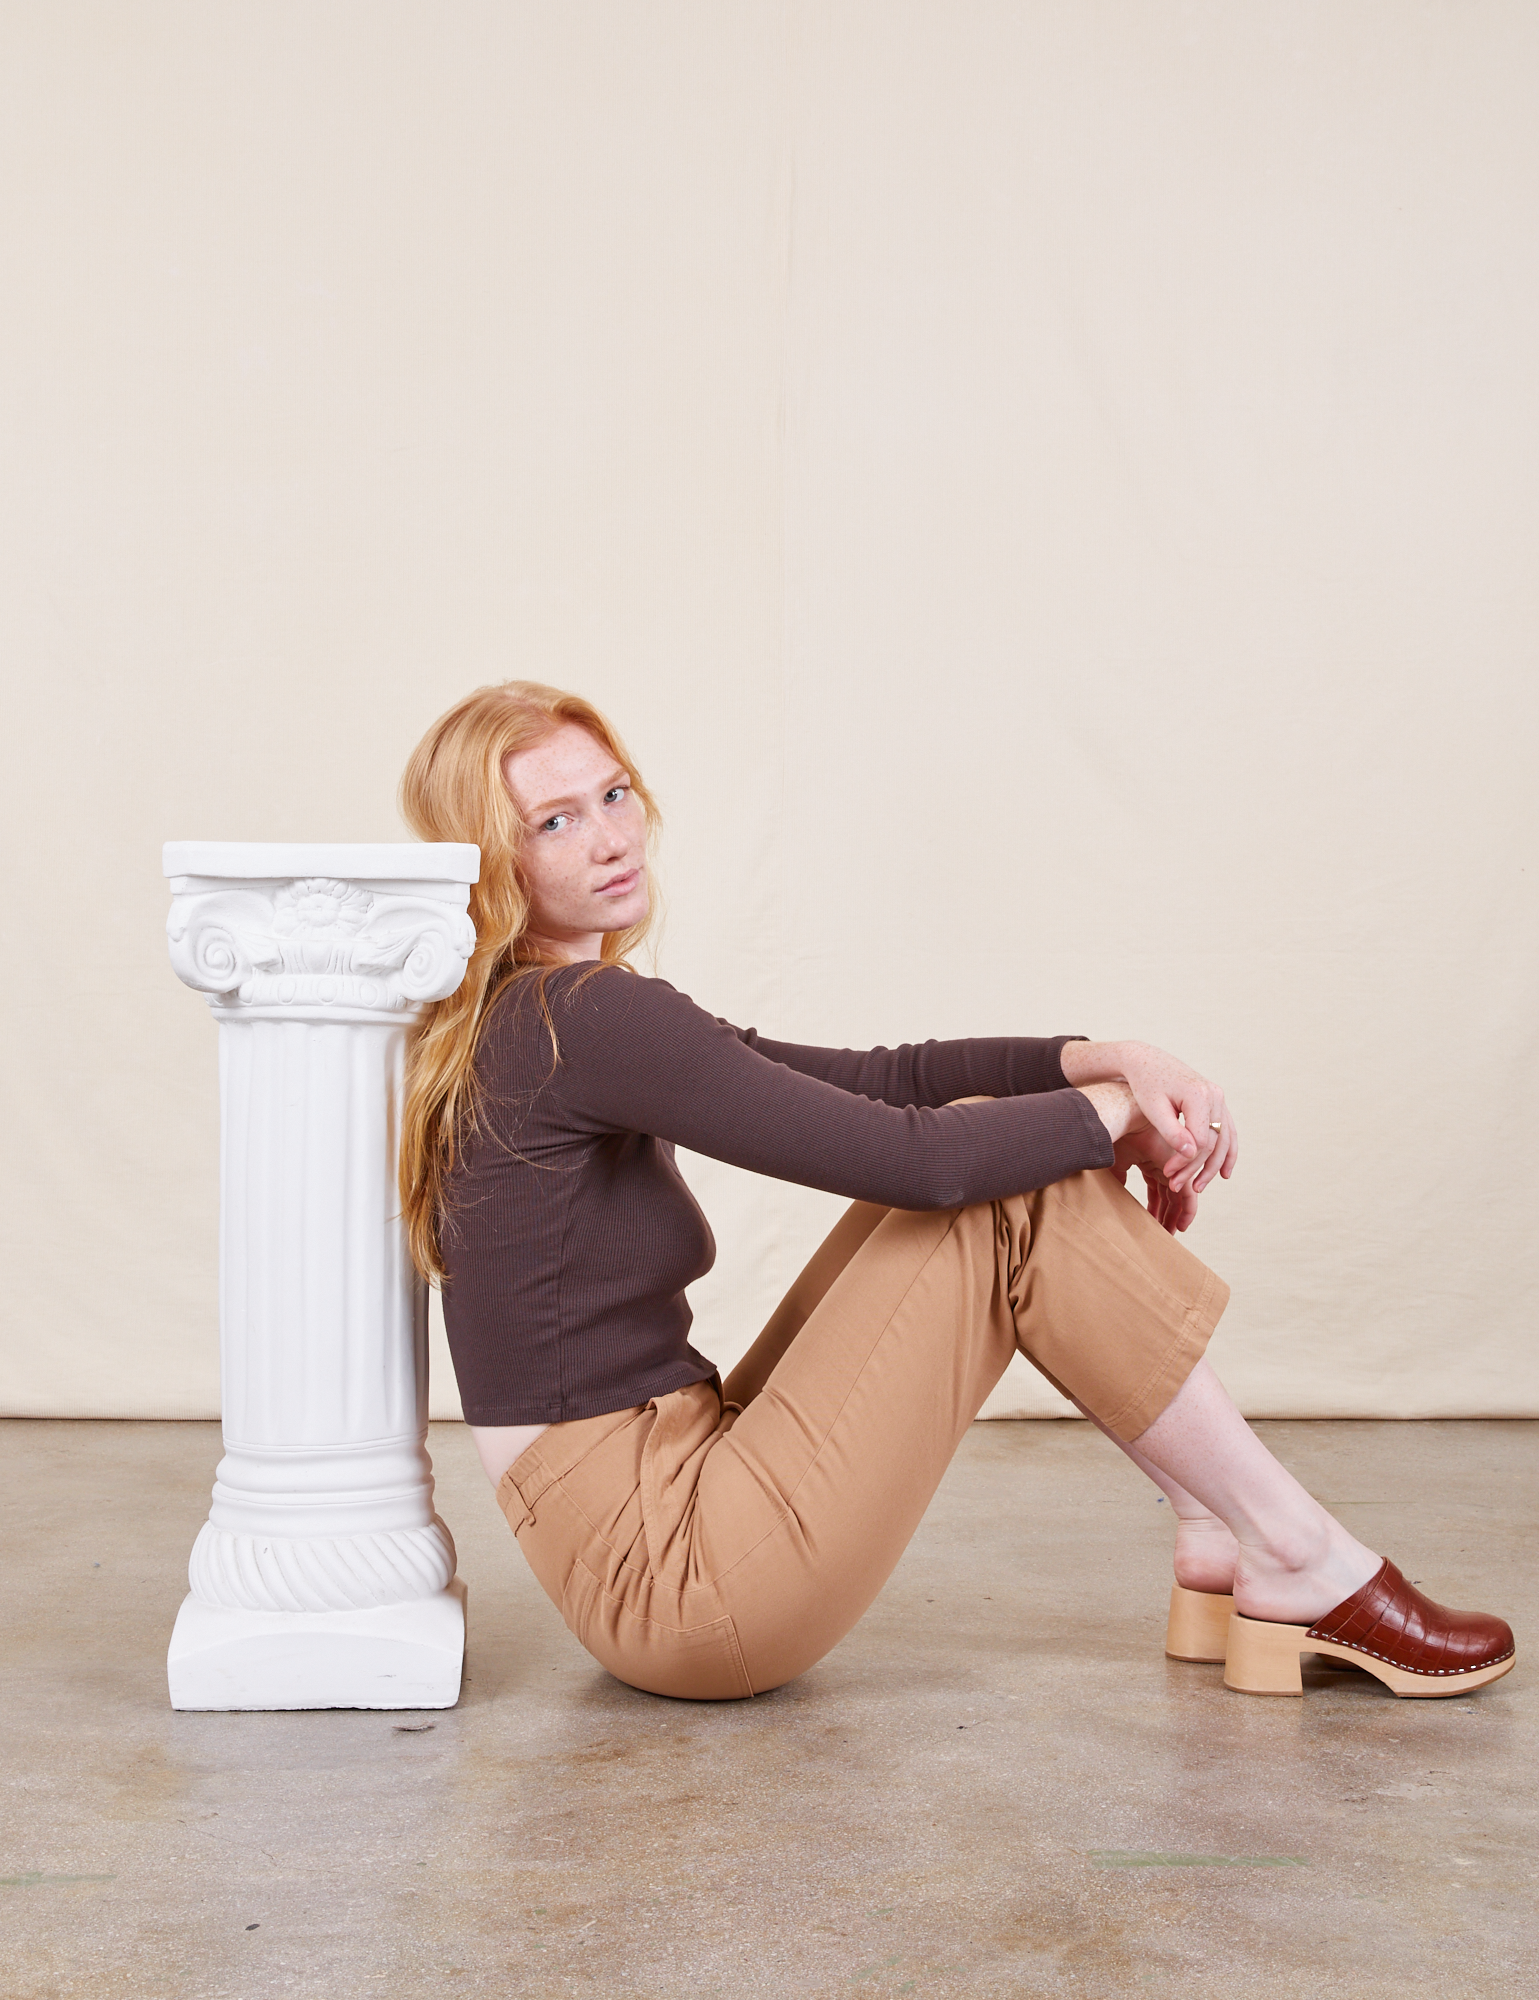 Margaret is sitting on the floor wearing Work Pants in Tan and espresso brown Long Sleeve V-Neck Tee